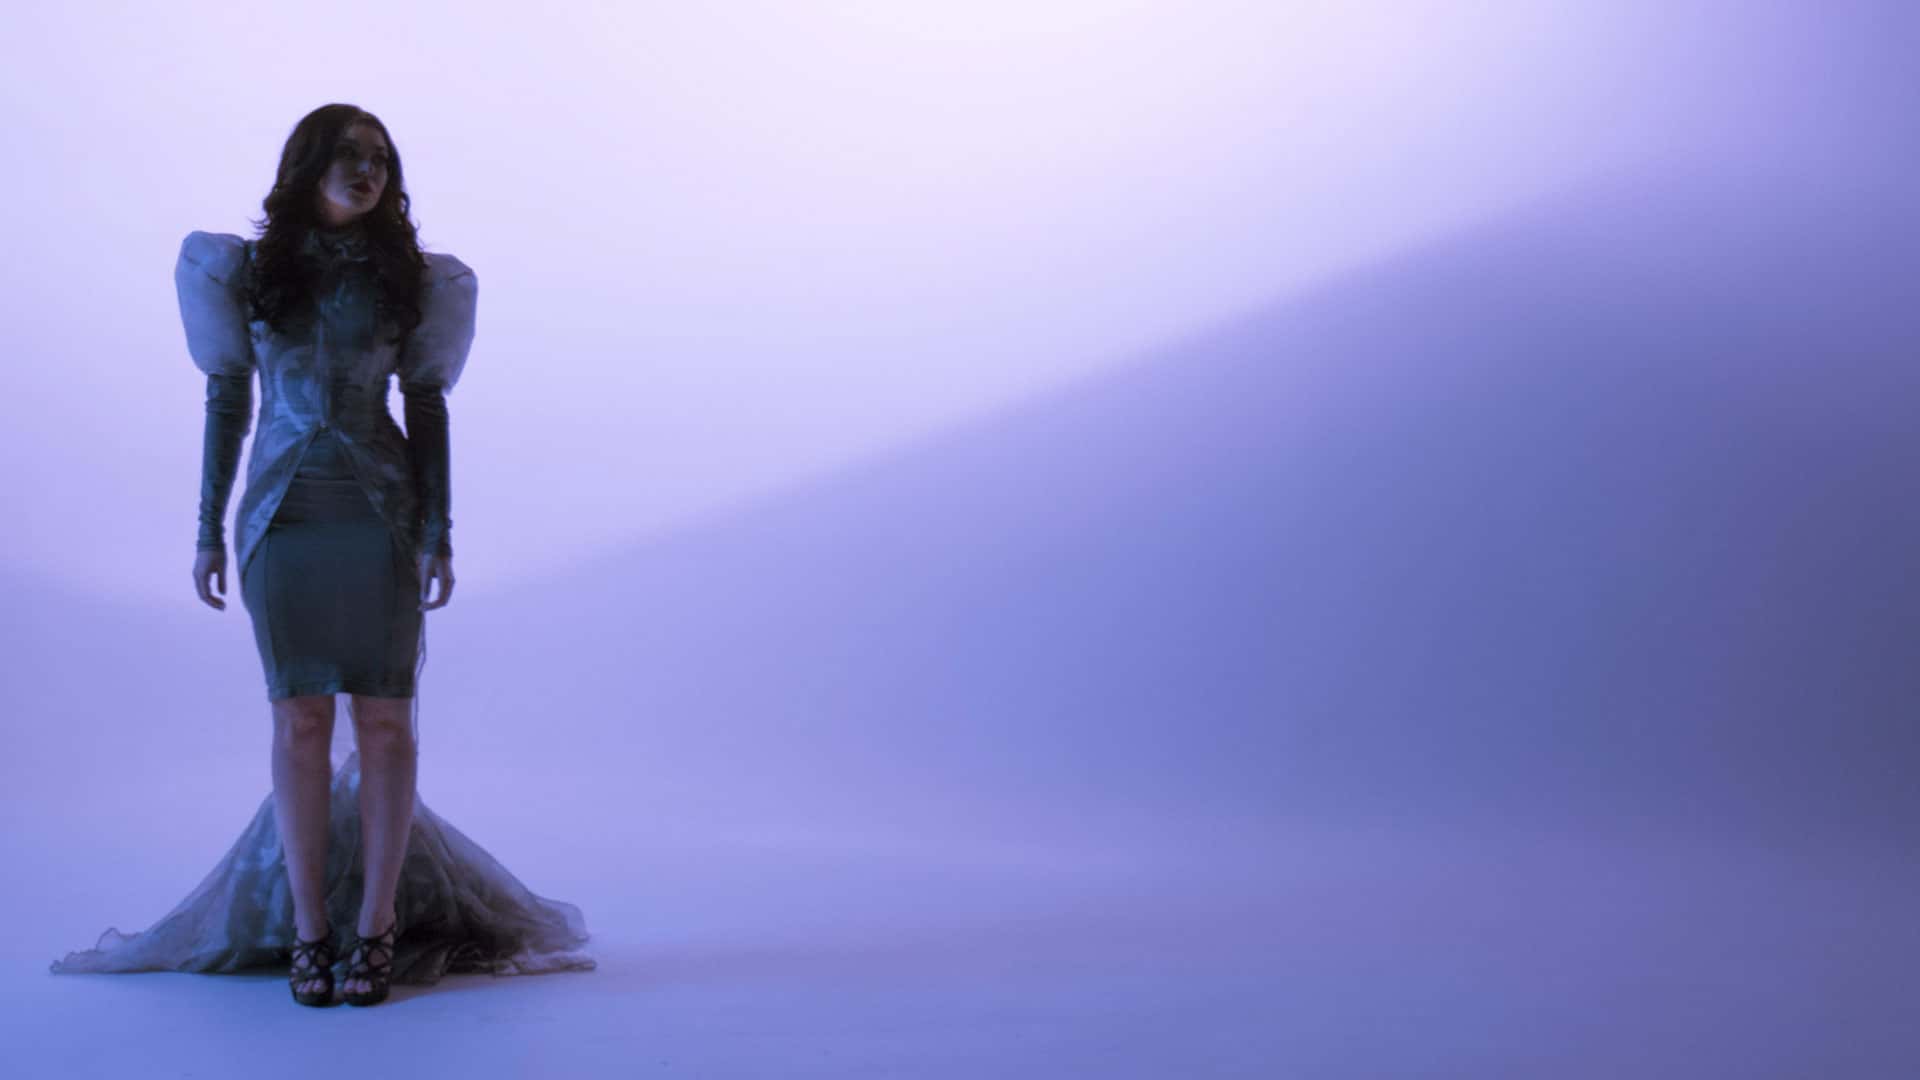 still from music video on cyclorama